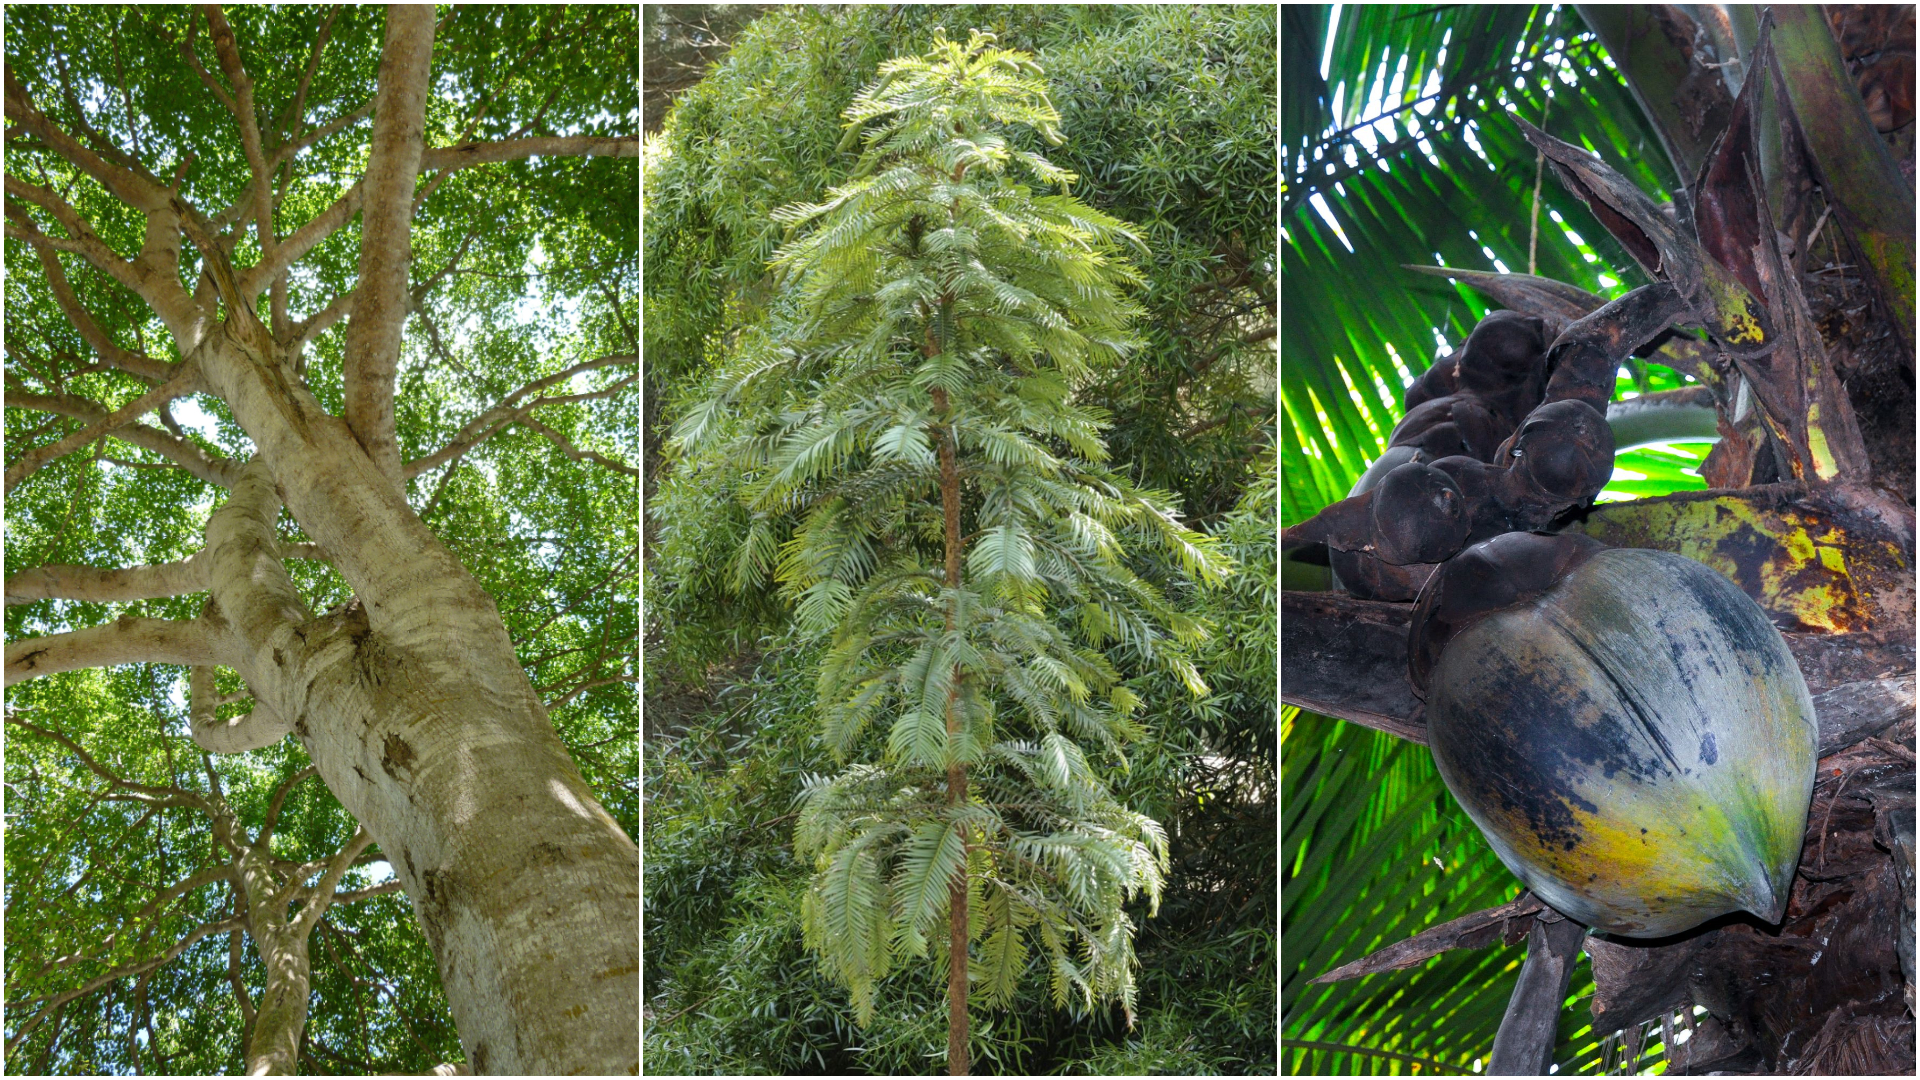  3 remarkable trees: A living fossil, a deadly canopy, and the world's biggest seeds that were once mounted in gold by royals 